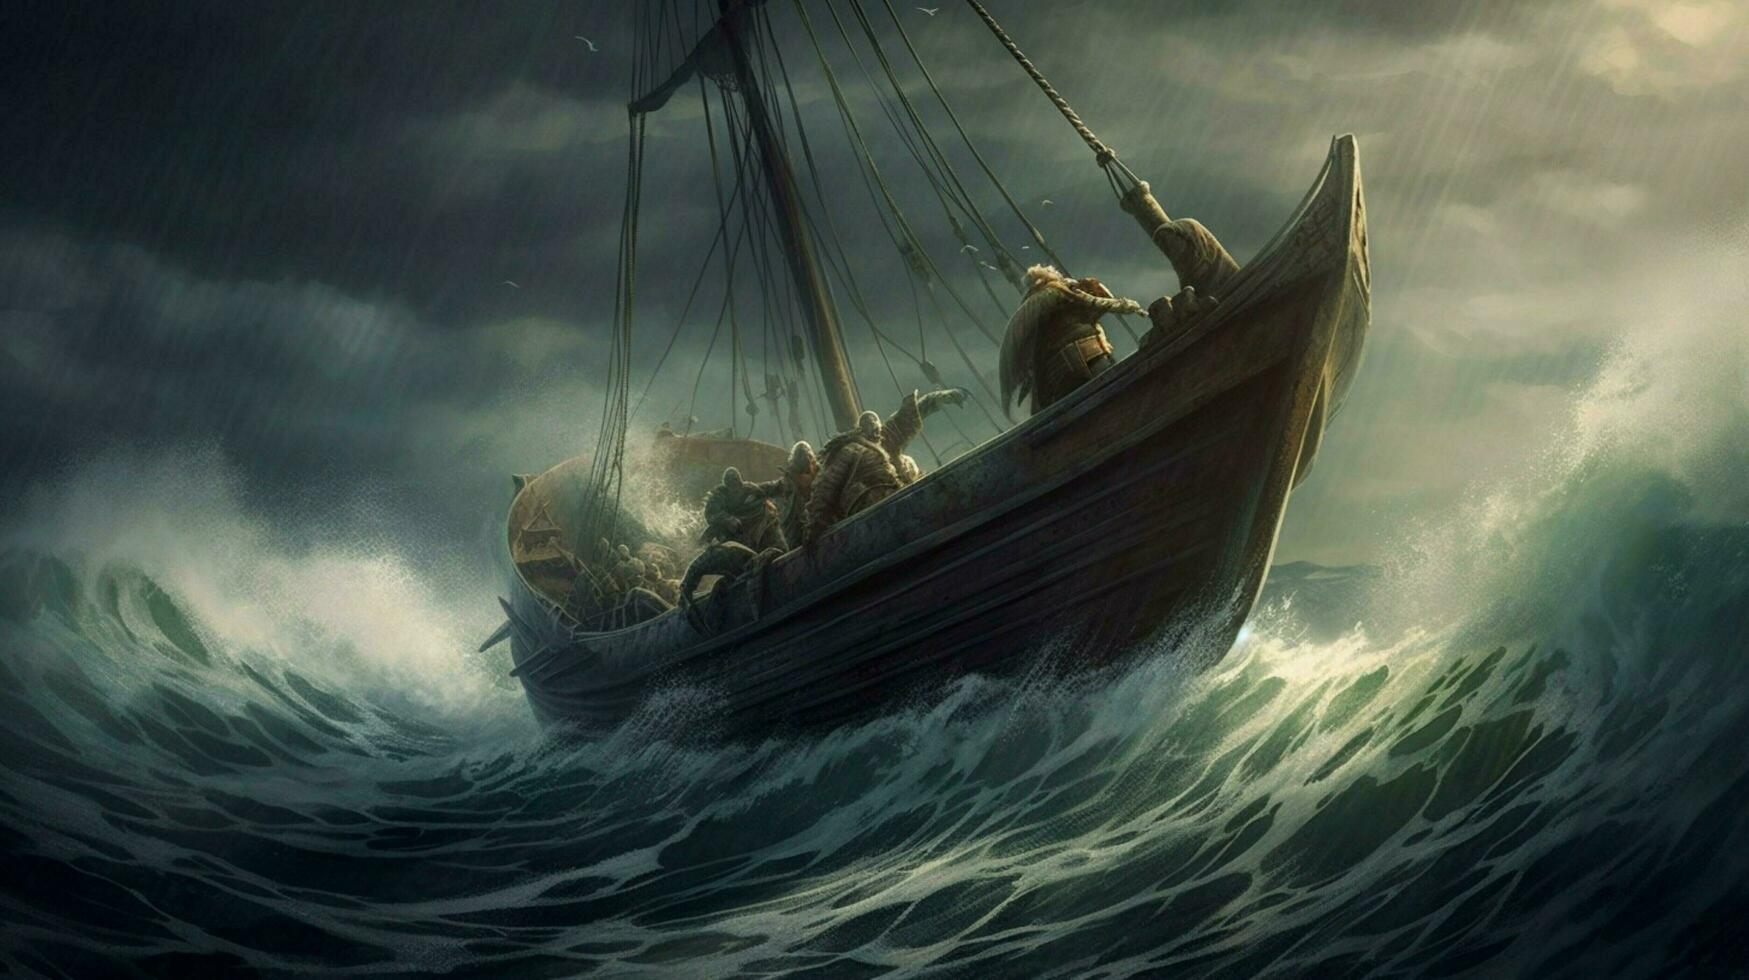 viking ship on stormy ocean with waves crashing a photo